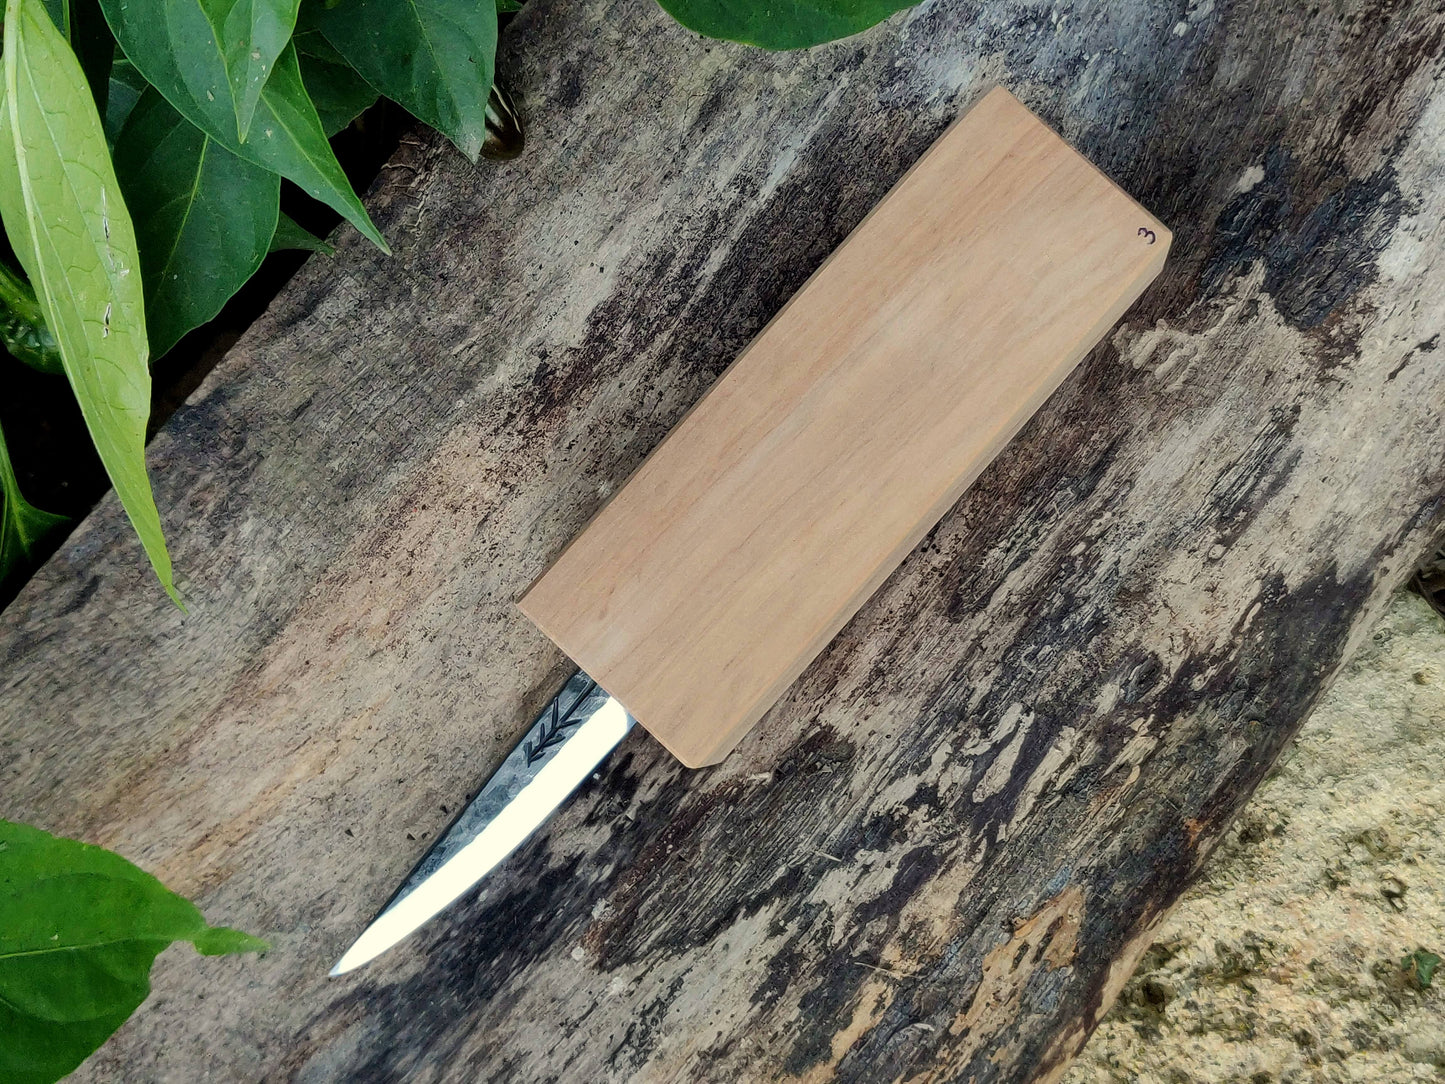 Make your own handle slojd knife not glued with wooden block, DHL Express shiping, Whittling knife, Fresh wood carving, Handcarving,